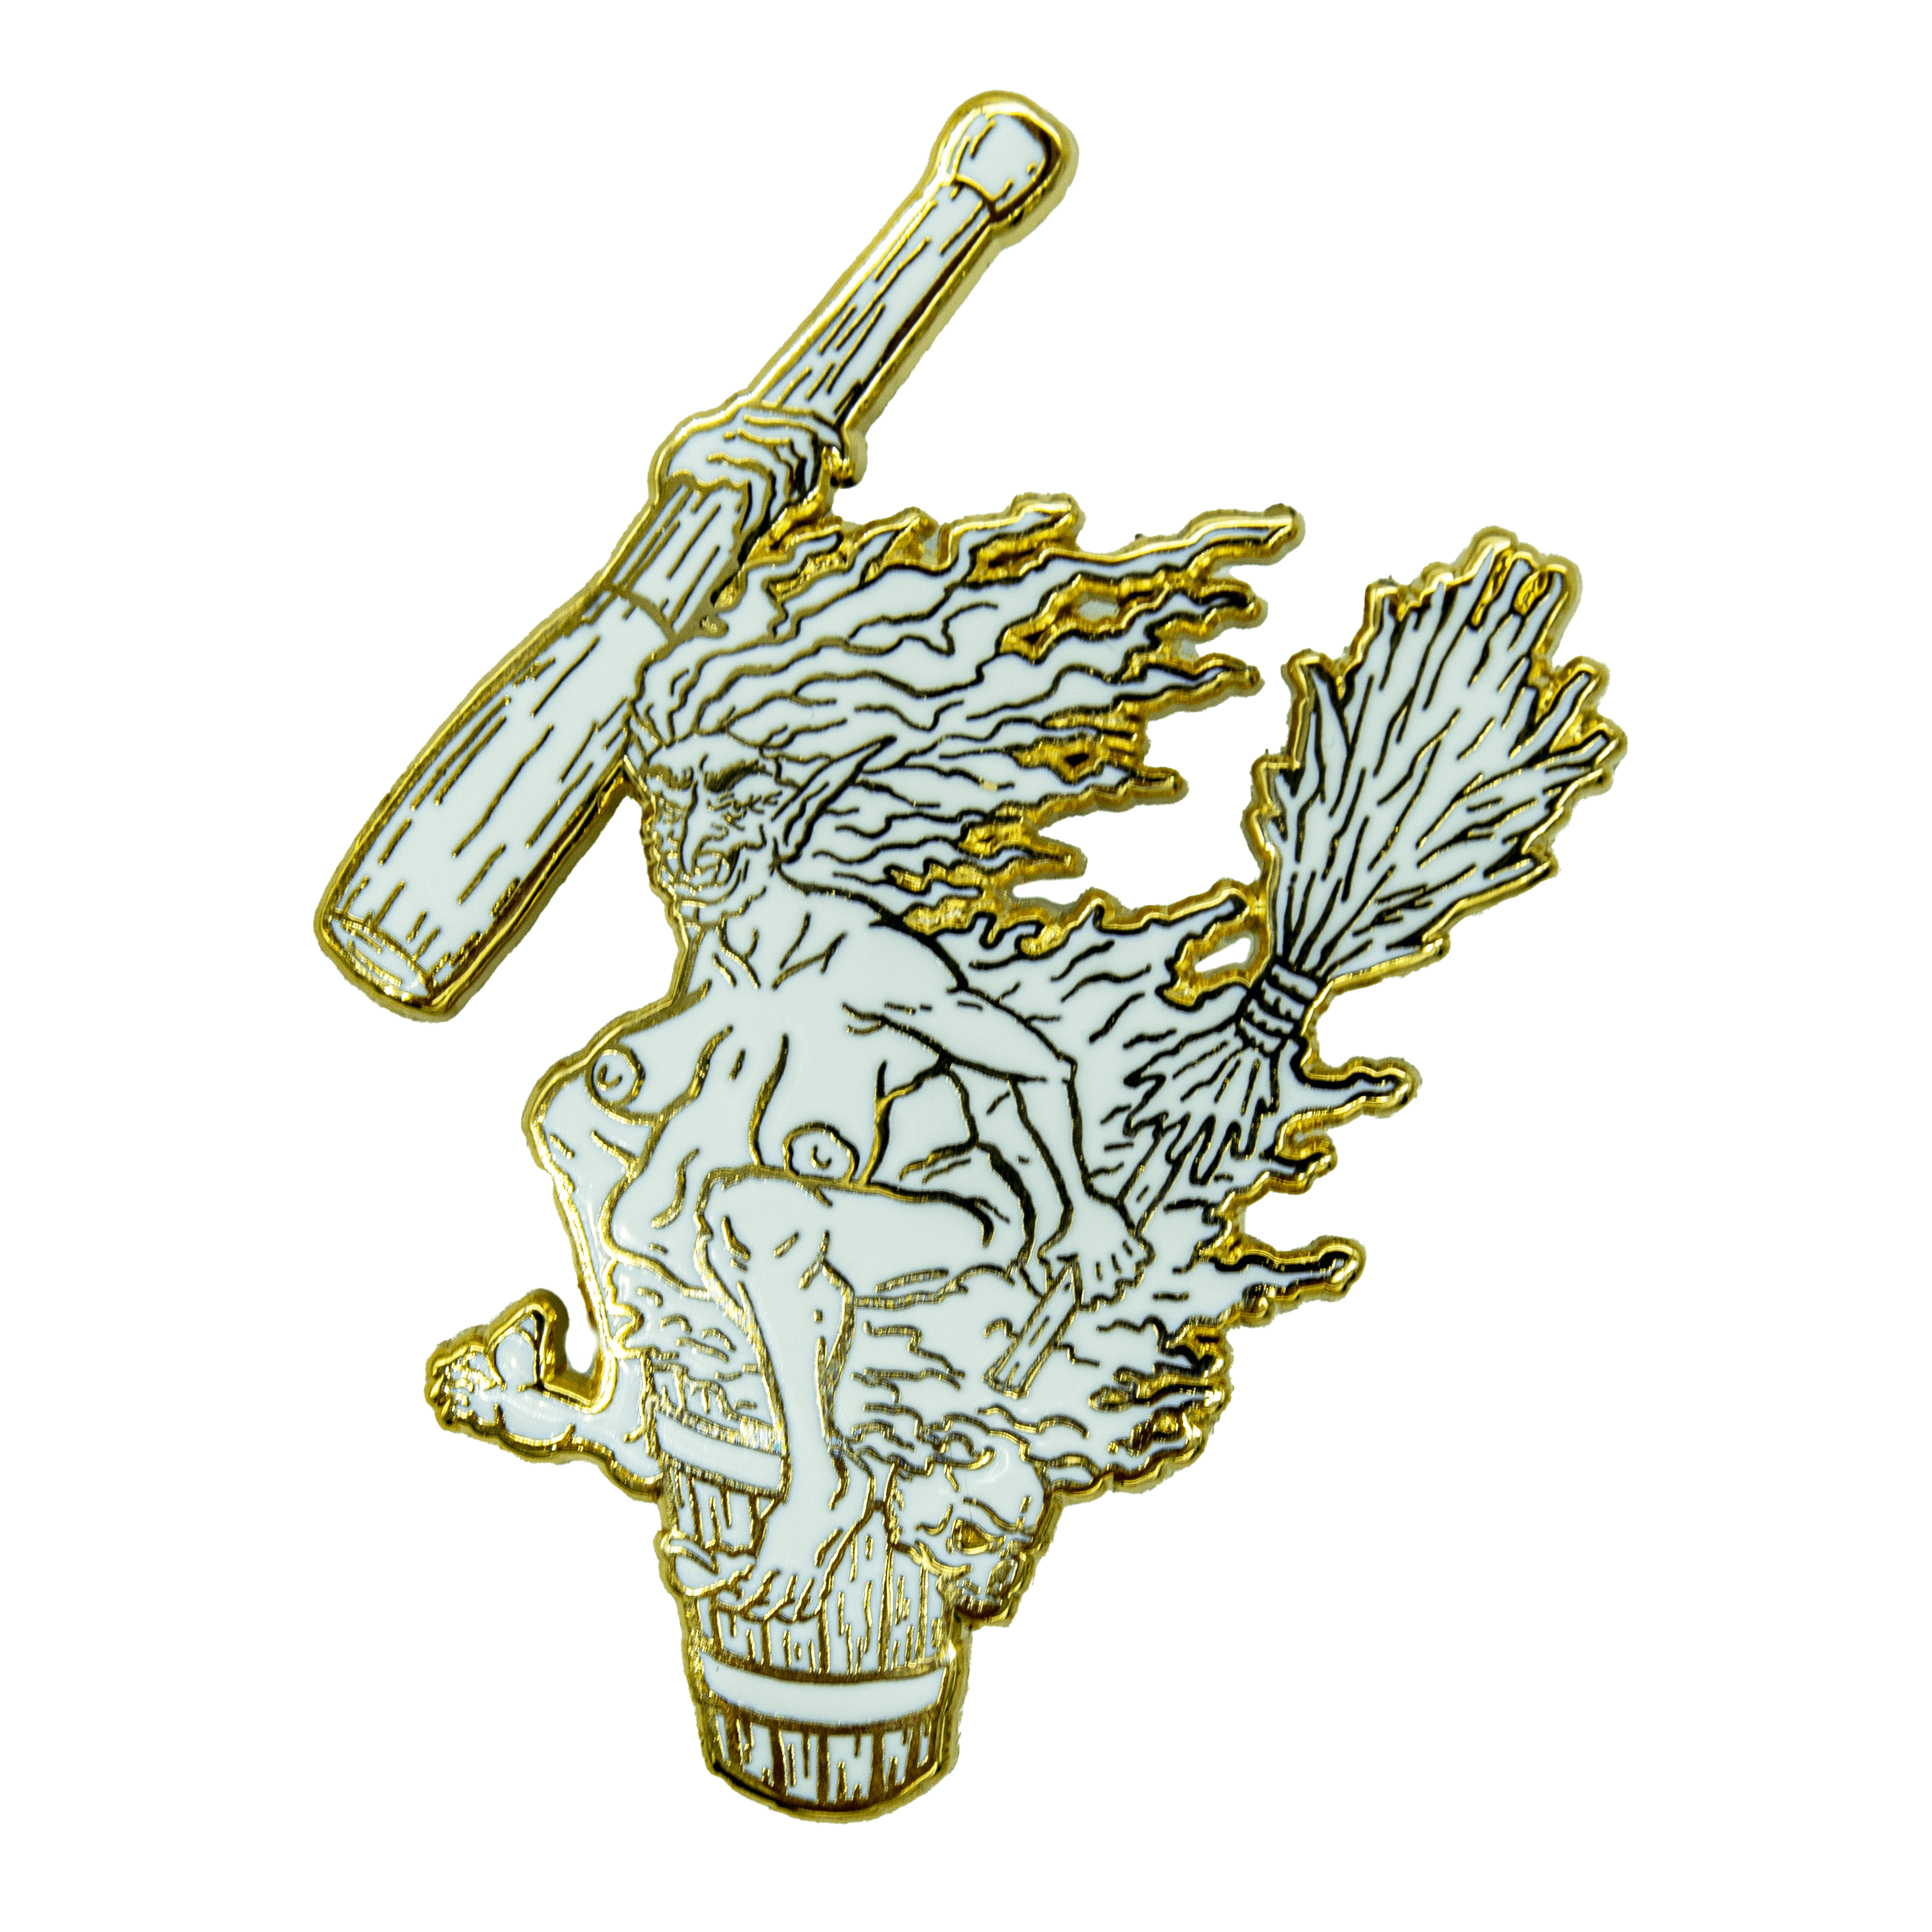 An enamel pin of Baba Yaga the crone witch, riding her mortar and pestle with broom in hand. She has taken off her clothing and sits on it with a wicked smile. The pin has a gold outline and all white fill.